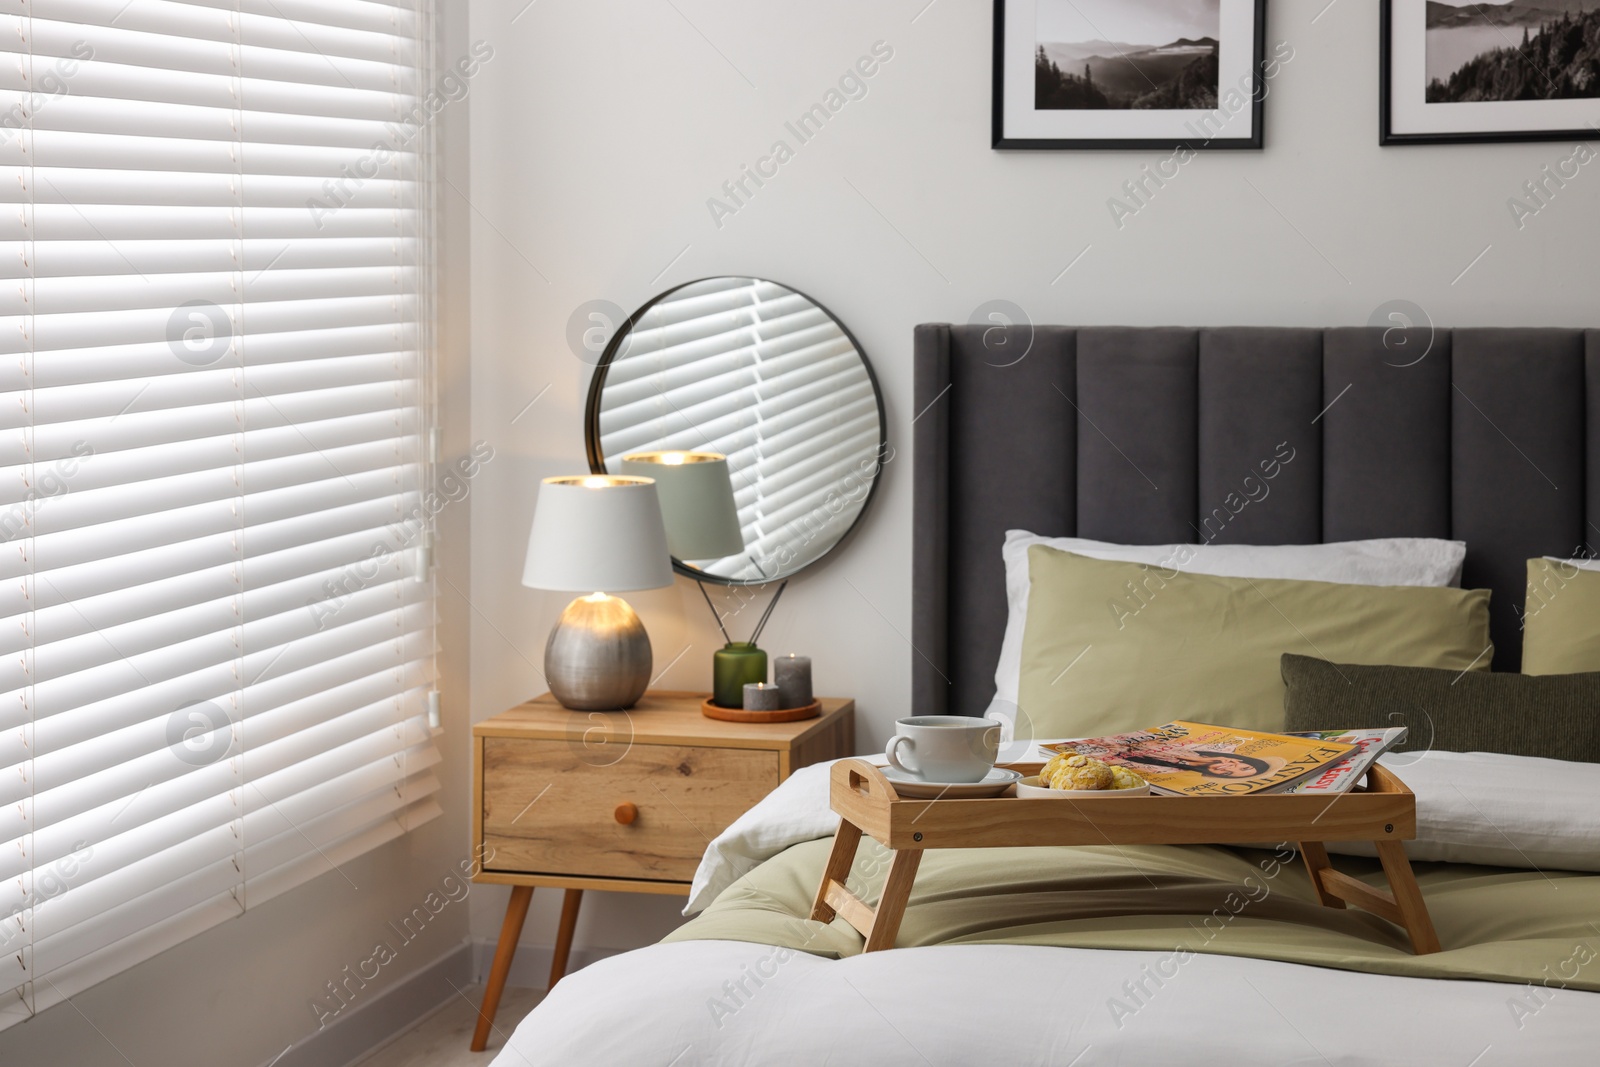 Photo of Wooden tray table with cup of drink and magazines on bed near window with horizontal blinds in room